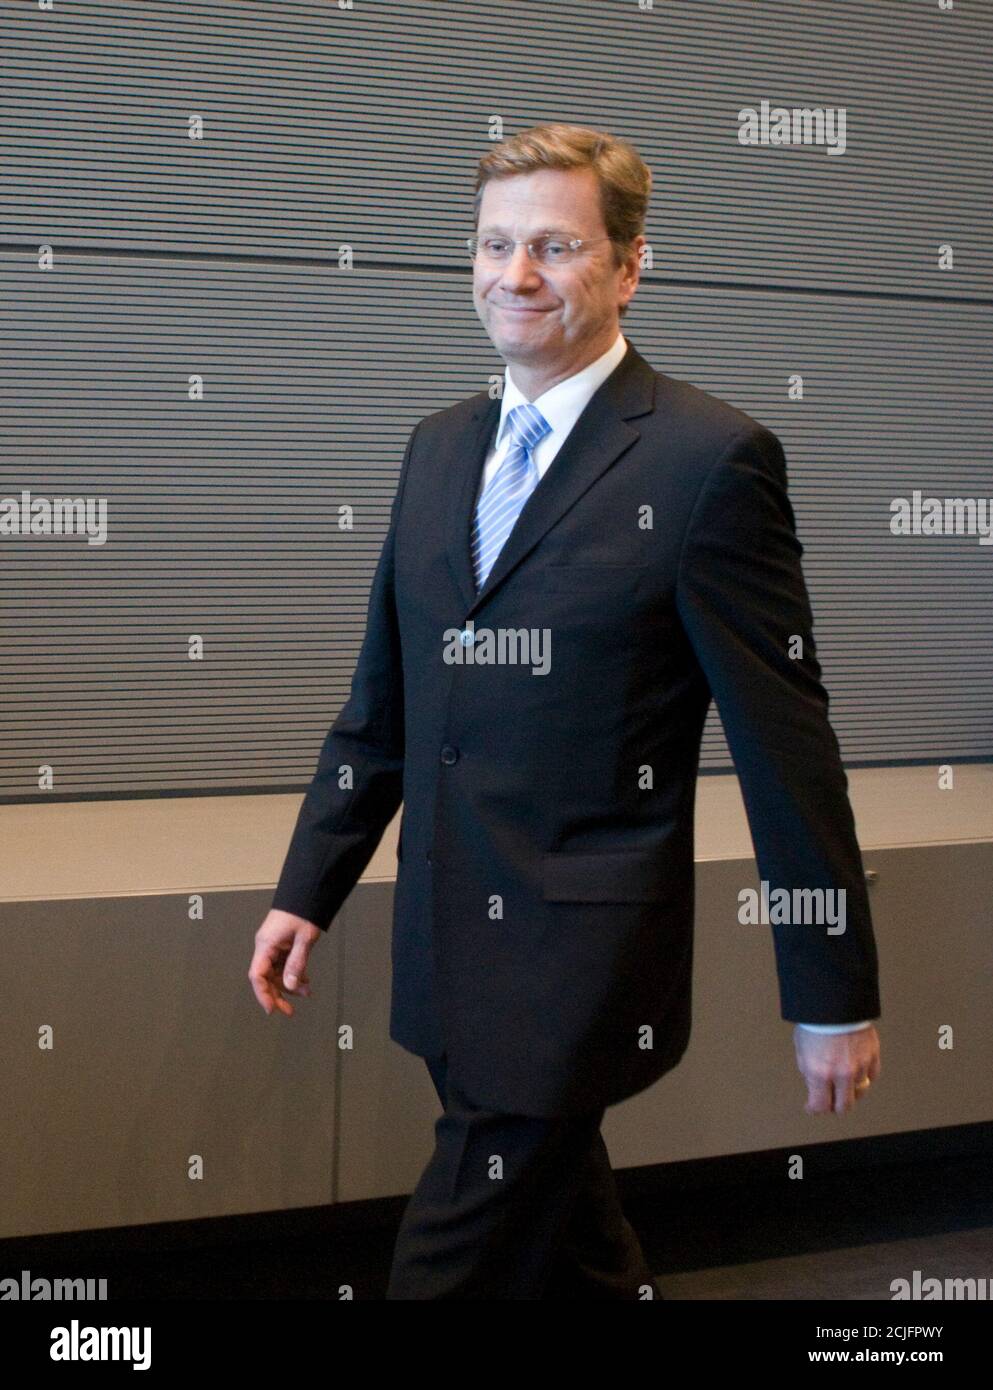 Leader of the Free Democrats Party (FDP) Guido Westerwelle arrives for a FDP parliamentary group meeting in Berlin October 20, 2009.  REUTERS/Thomas Peter (GERMANY POLITICS) Stock Photo